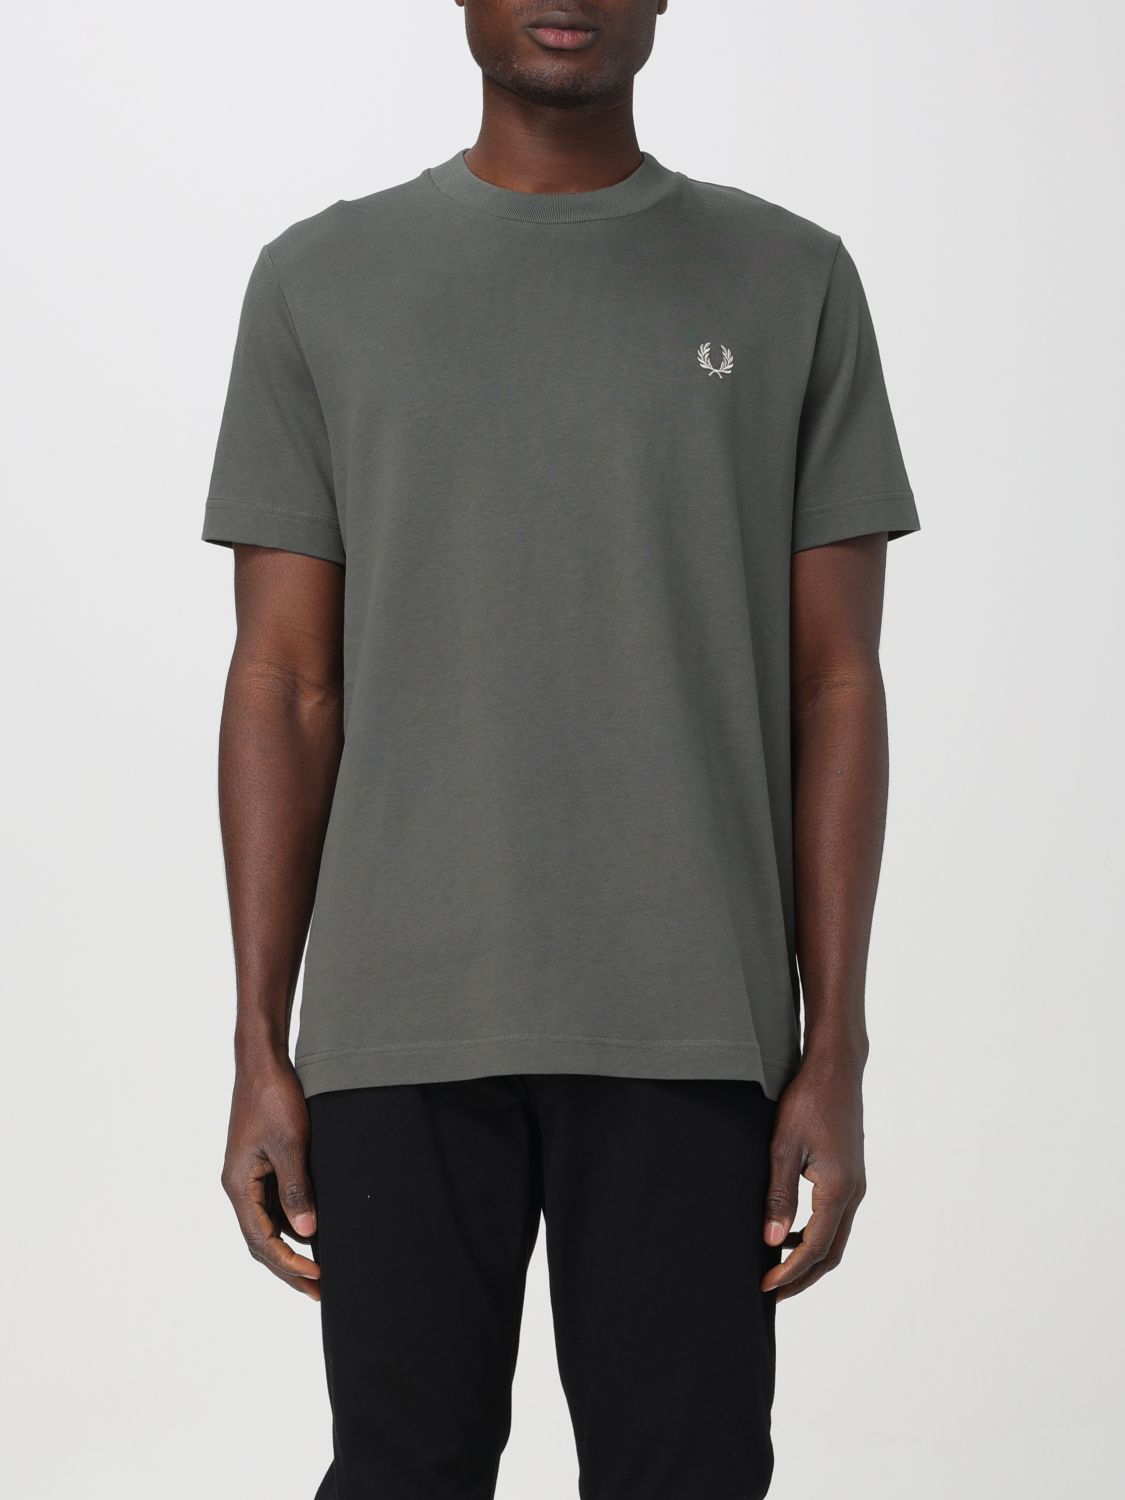 Fred Perry T-shirt  Men Color Green